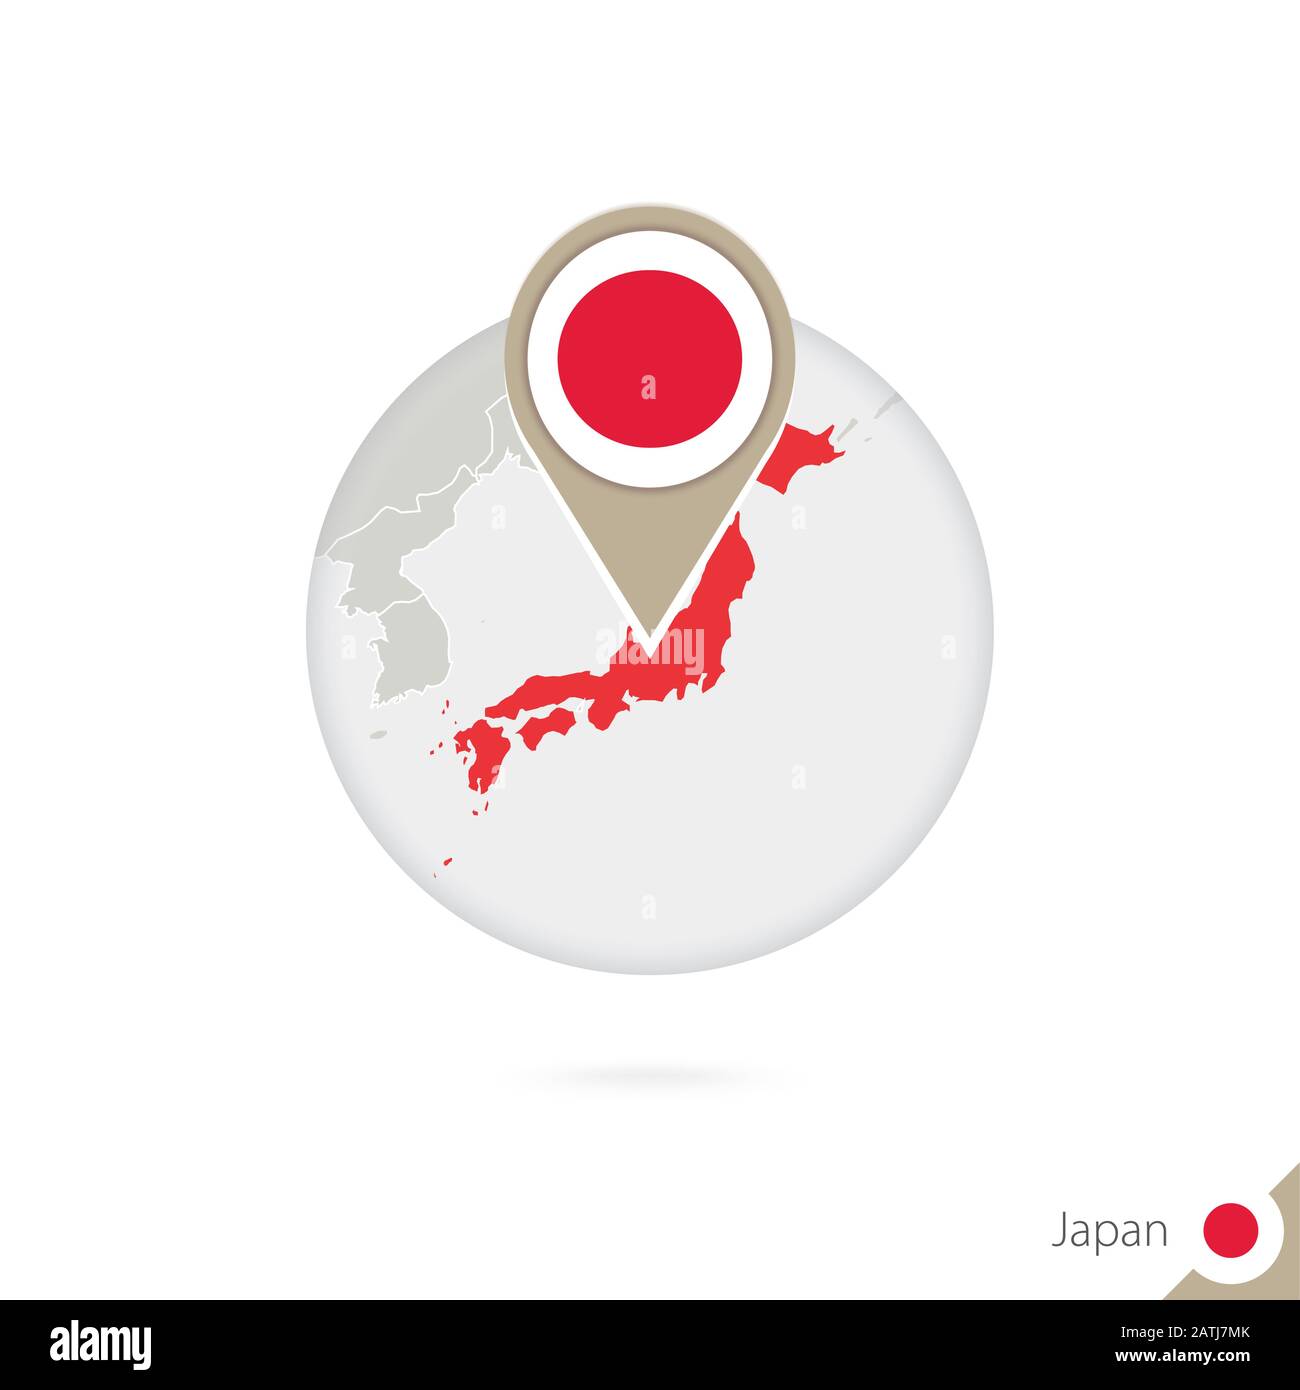 Japan map and flag in circle. Map of Japan, Japan flag pin. Map of Japan in the style of the globe. Vector Illustration. Stock Vector